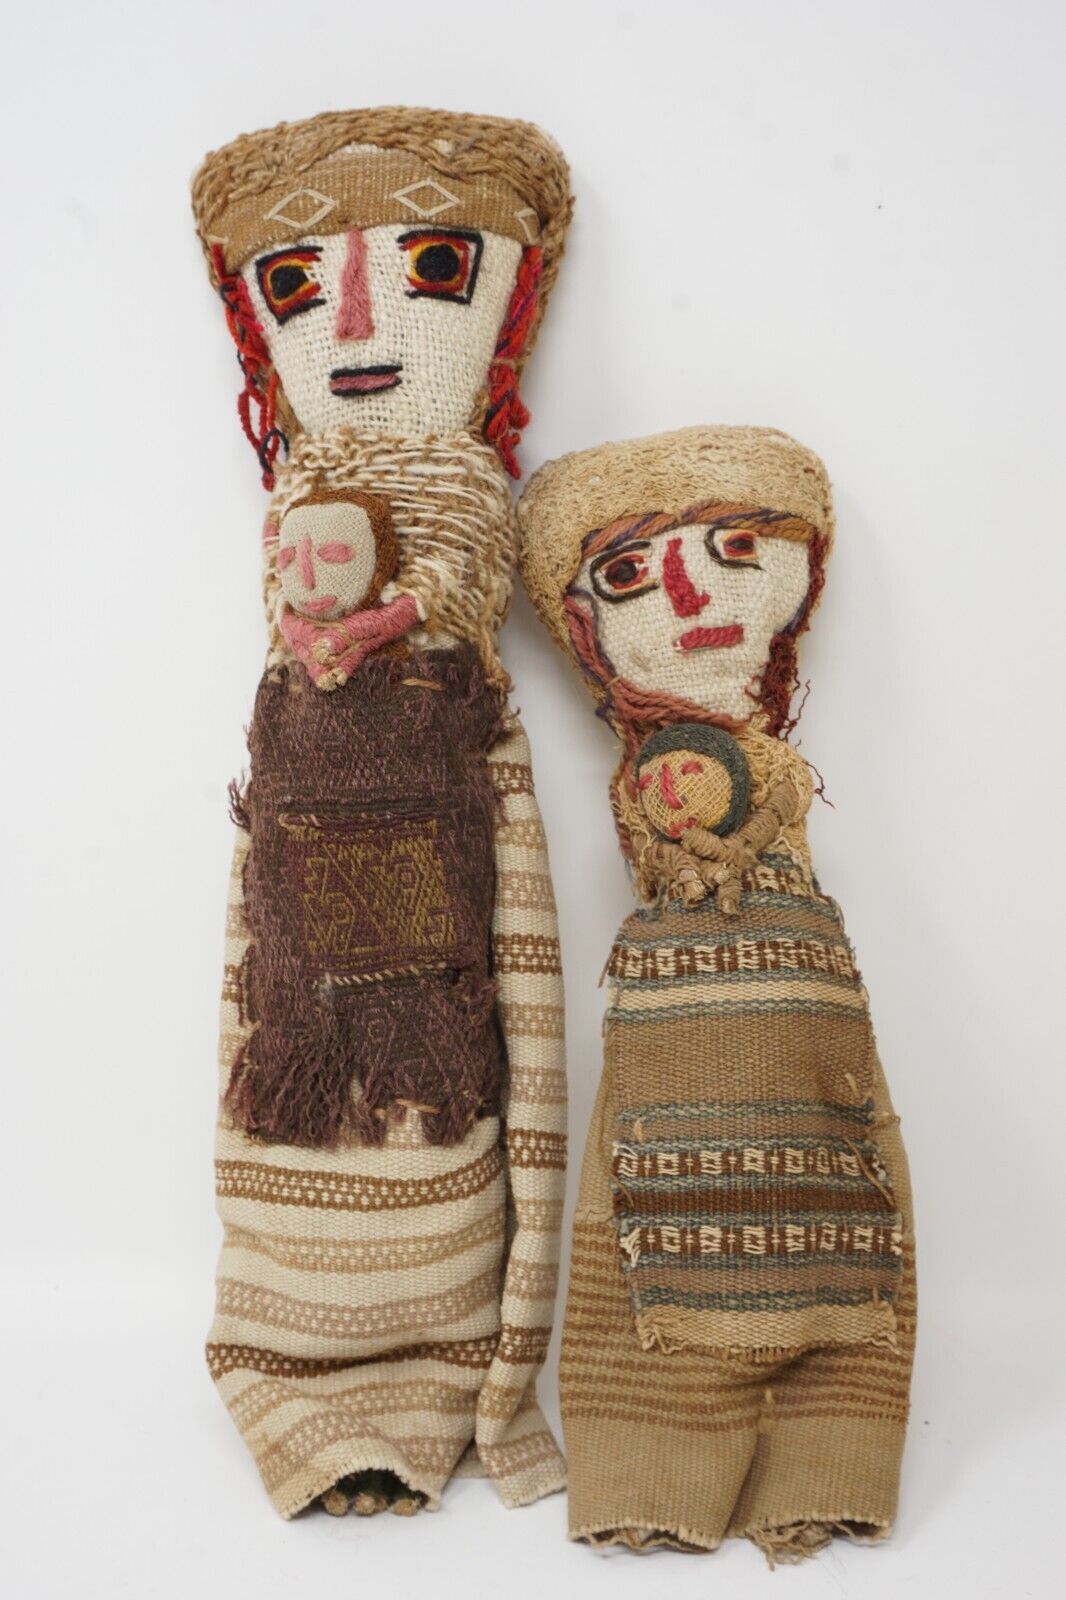 2 Vintage Chancay Mother With Child Burial Doll Textile Peruvian Folk Art 